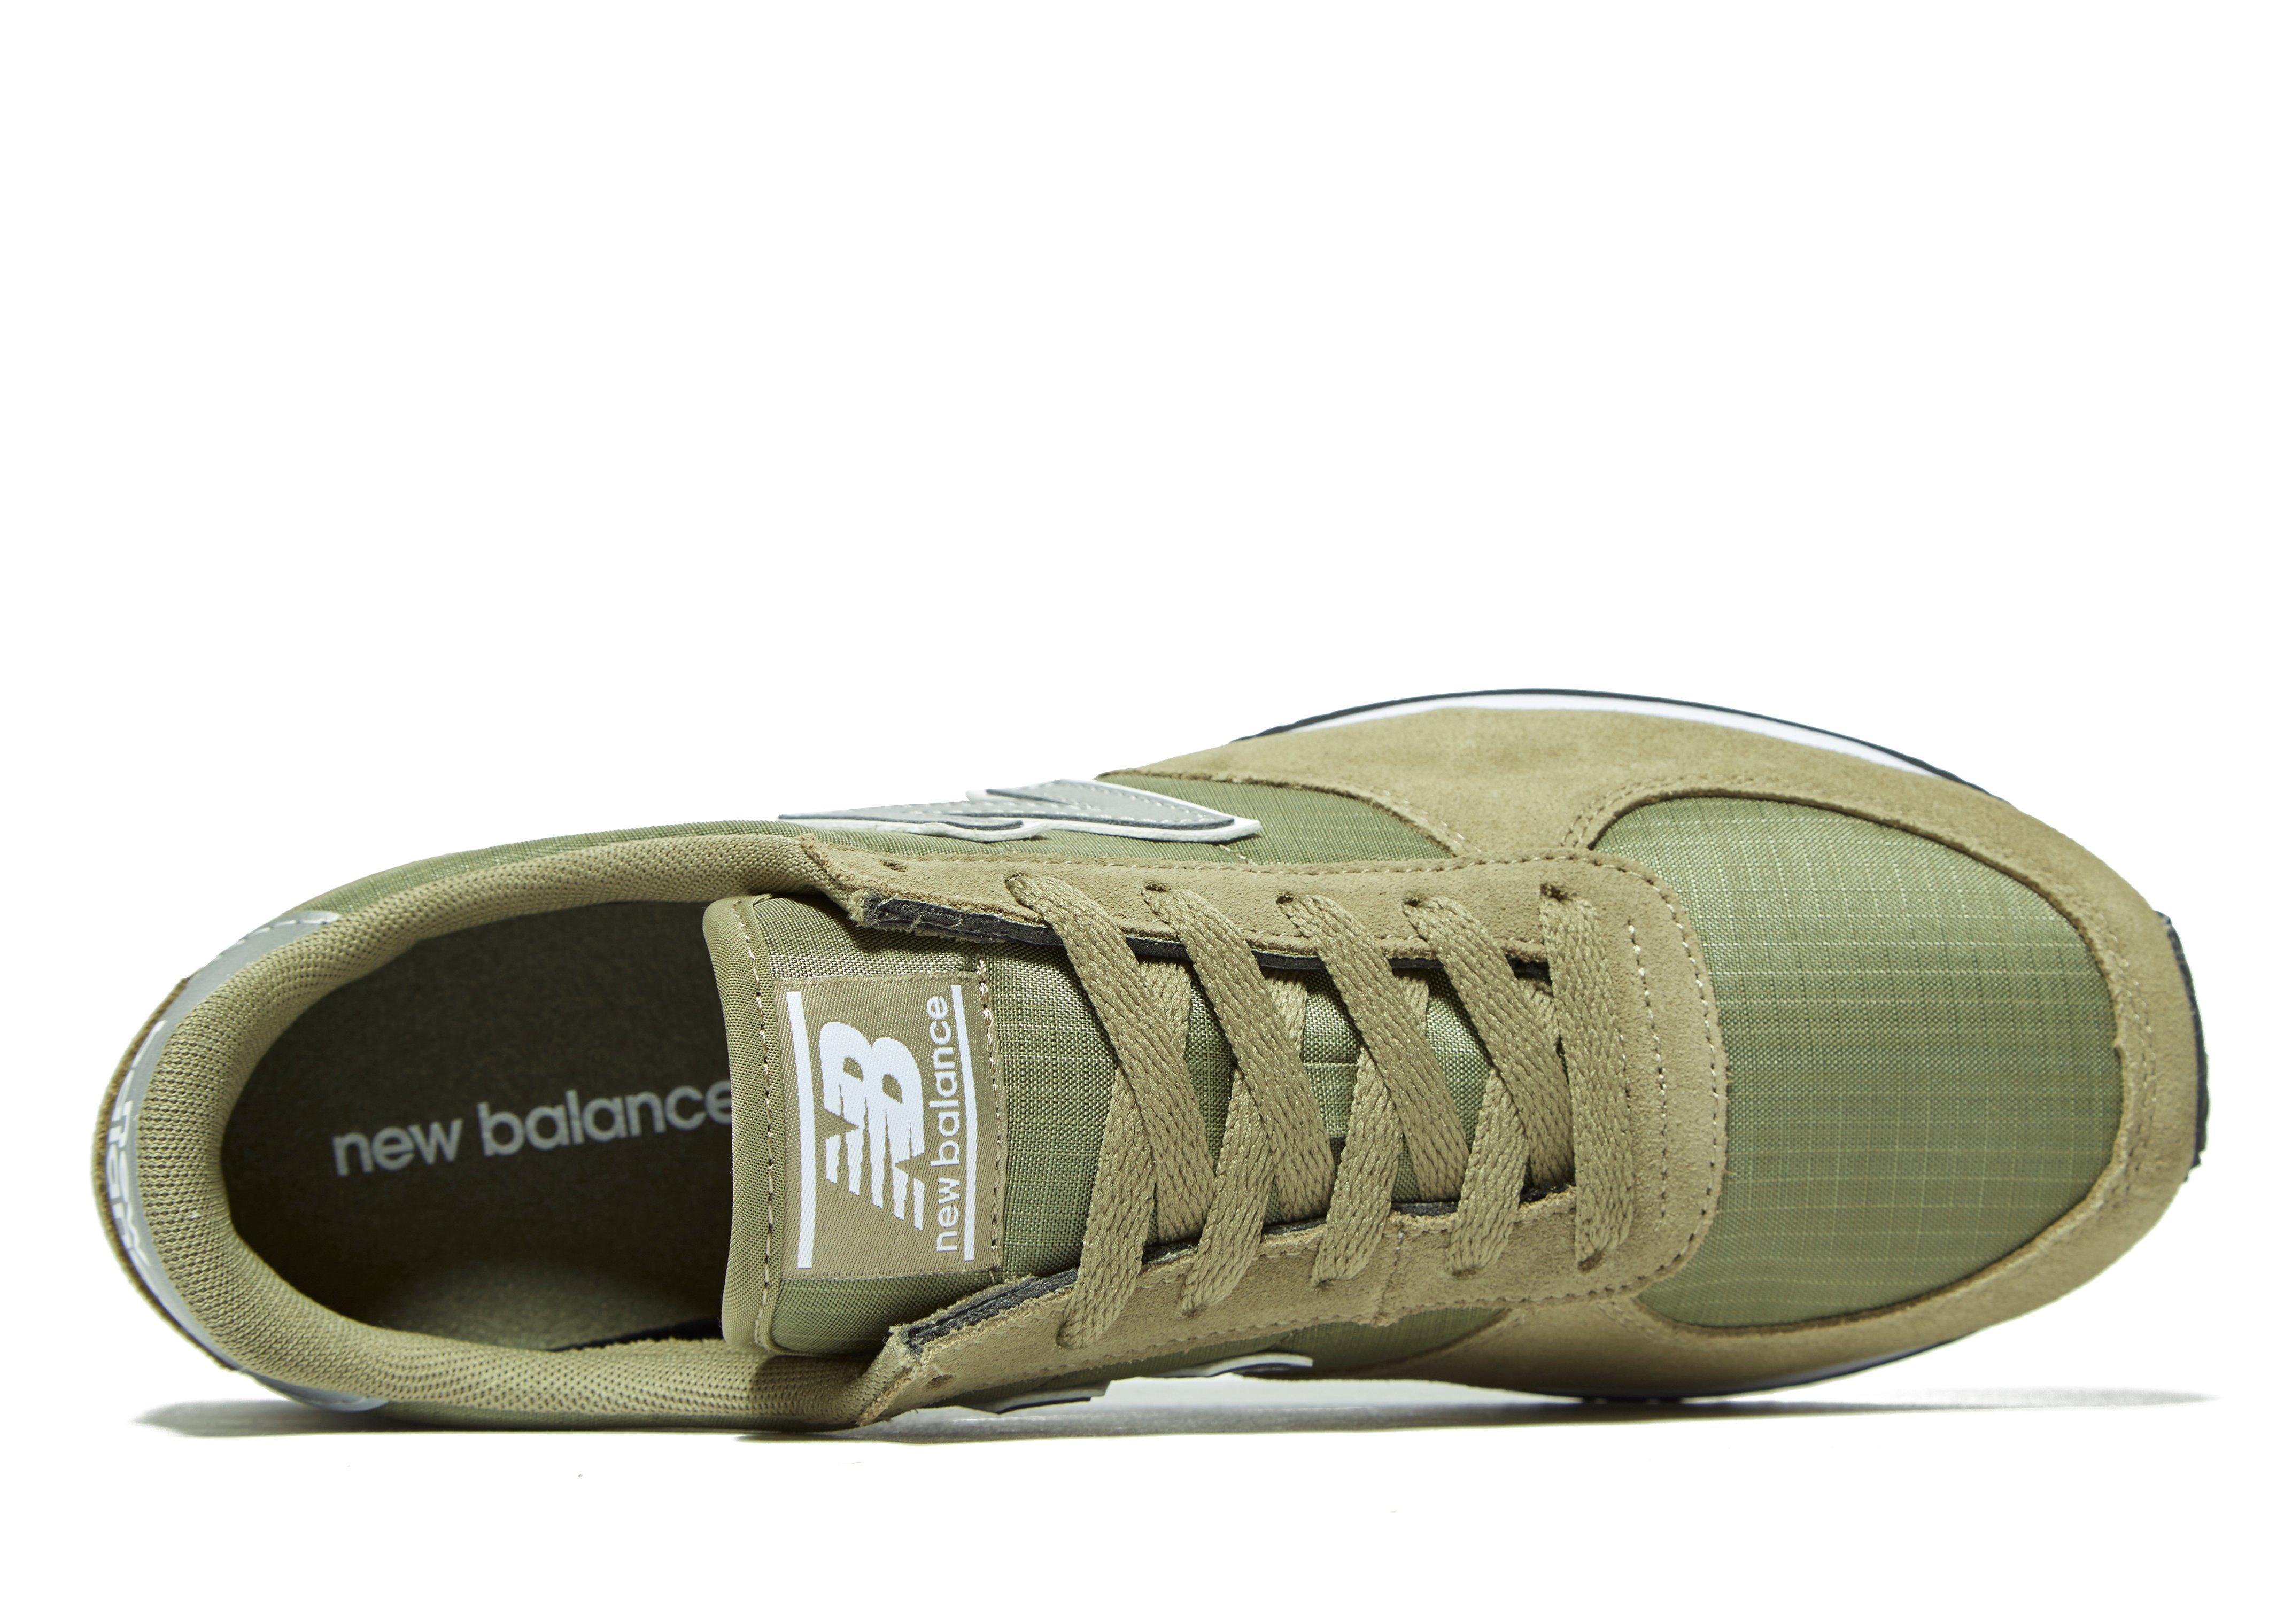 New Balance Suede 220 Ripstop in Olive 